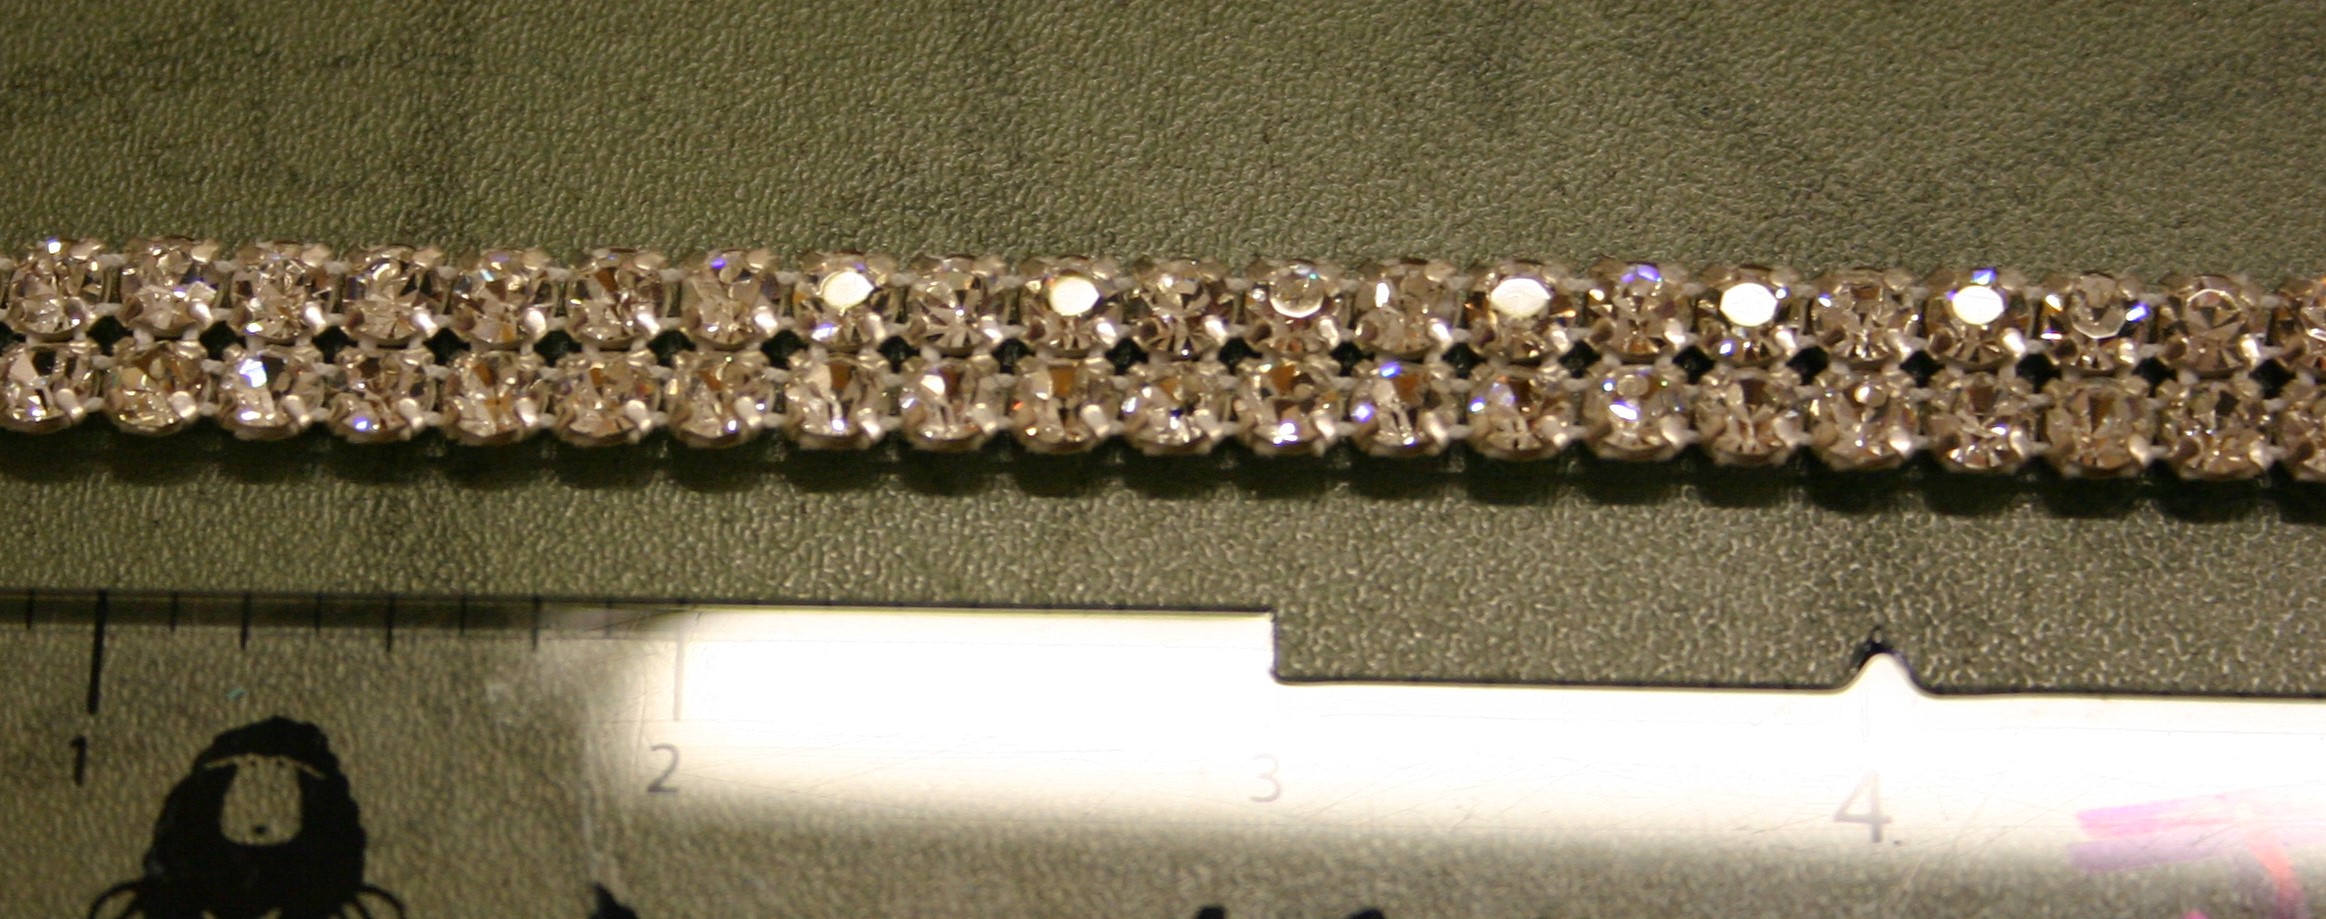 Bling Bling Trim - Double Rows of Crystals w Silver Backing on Mesh Tape - By the Yard